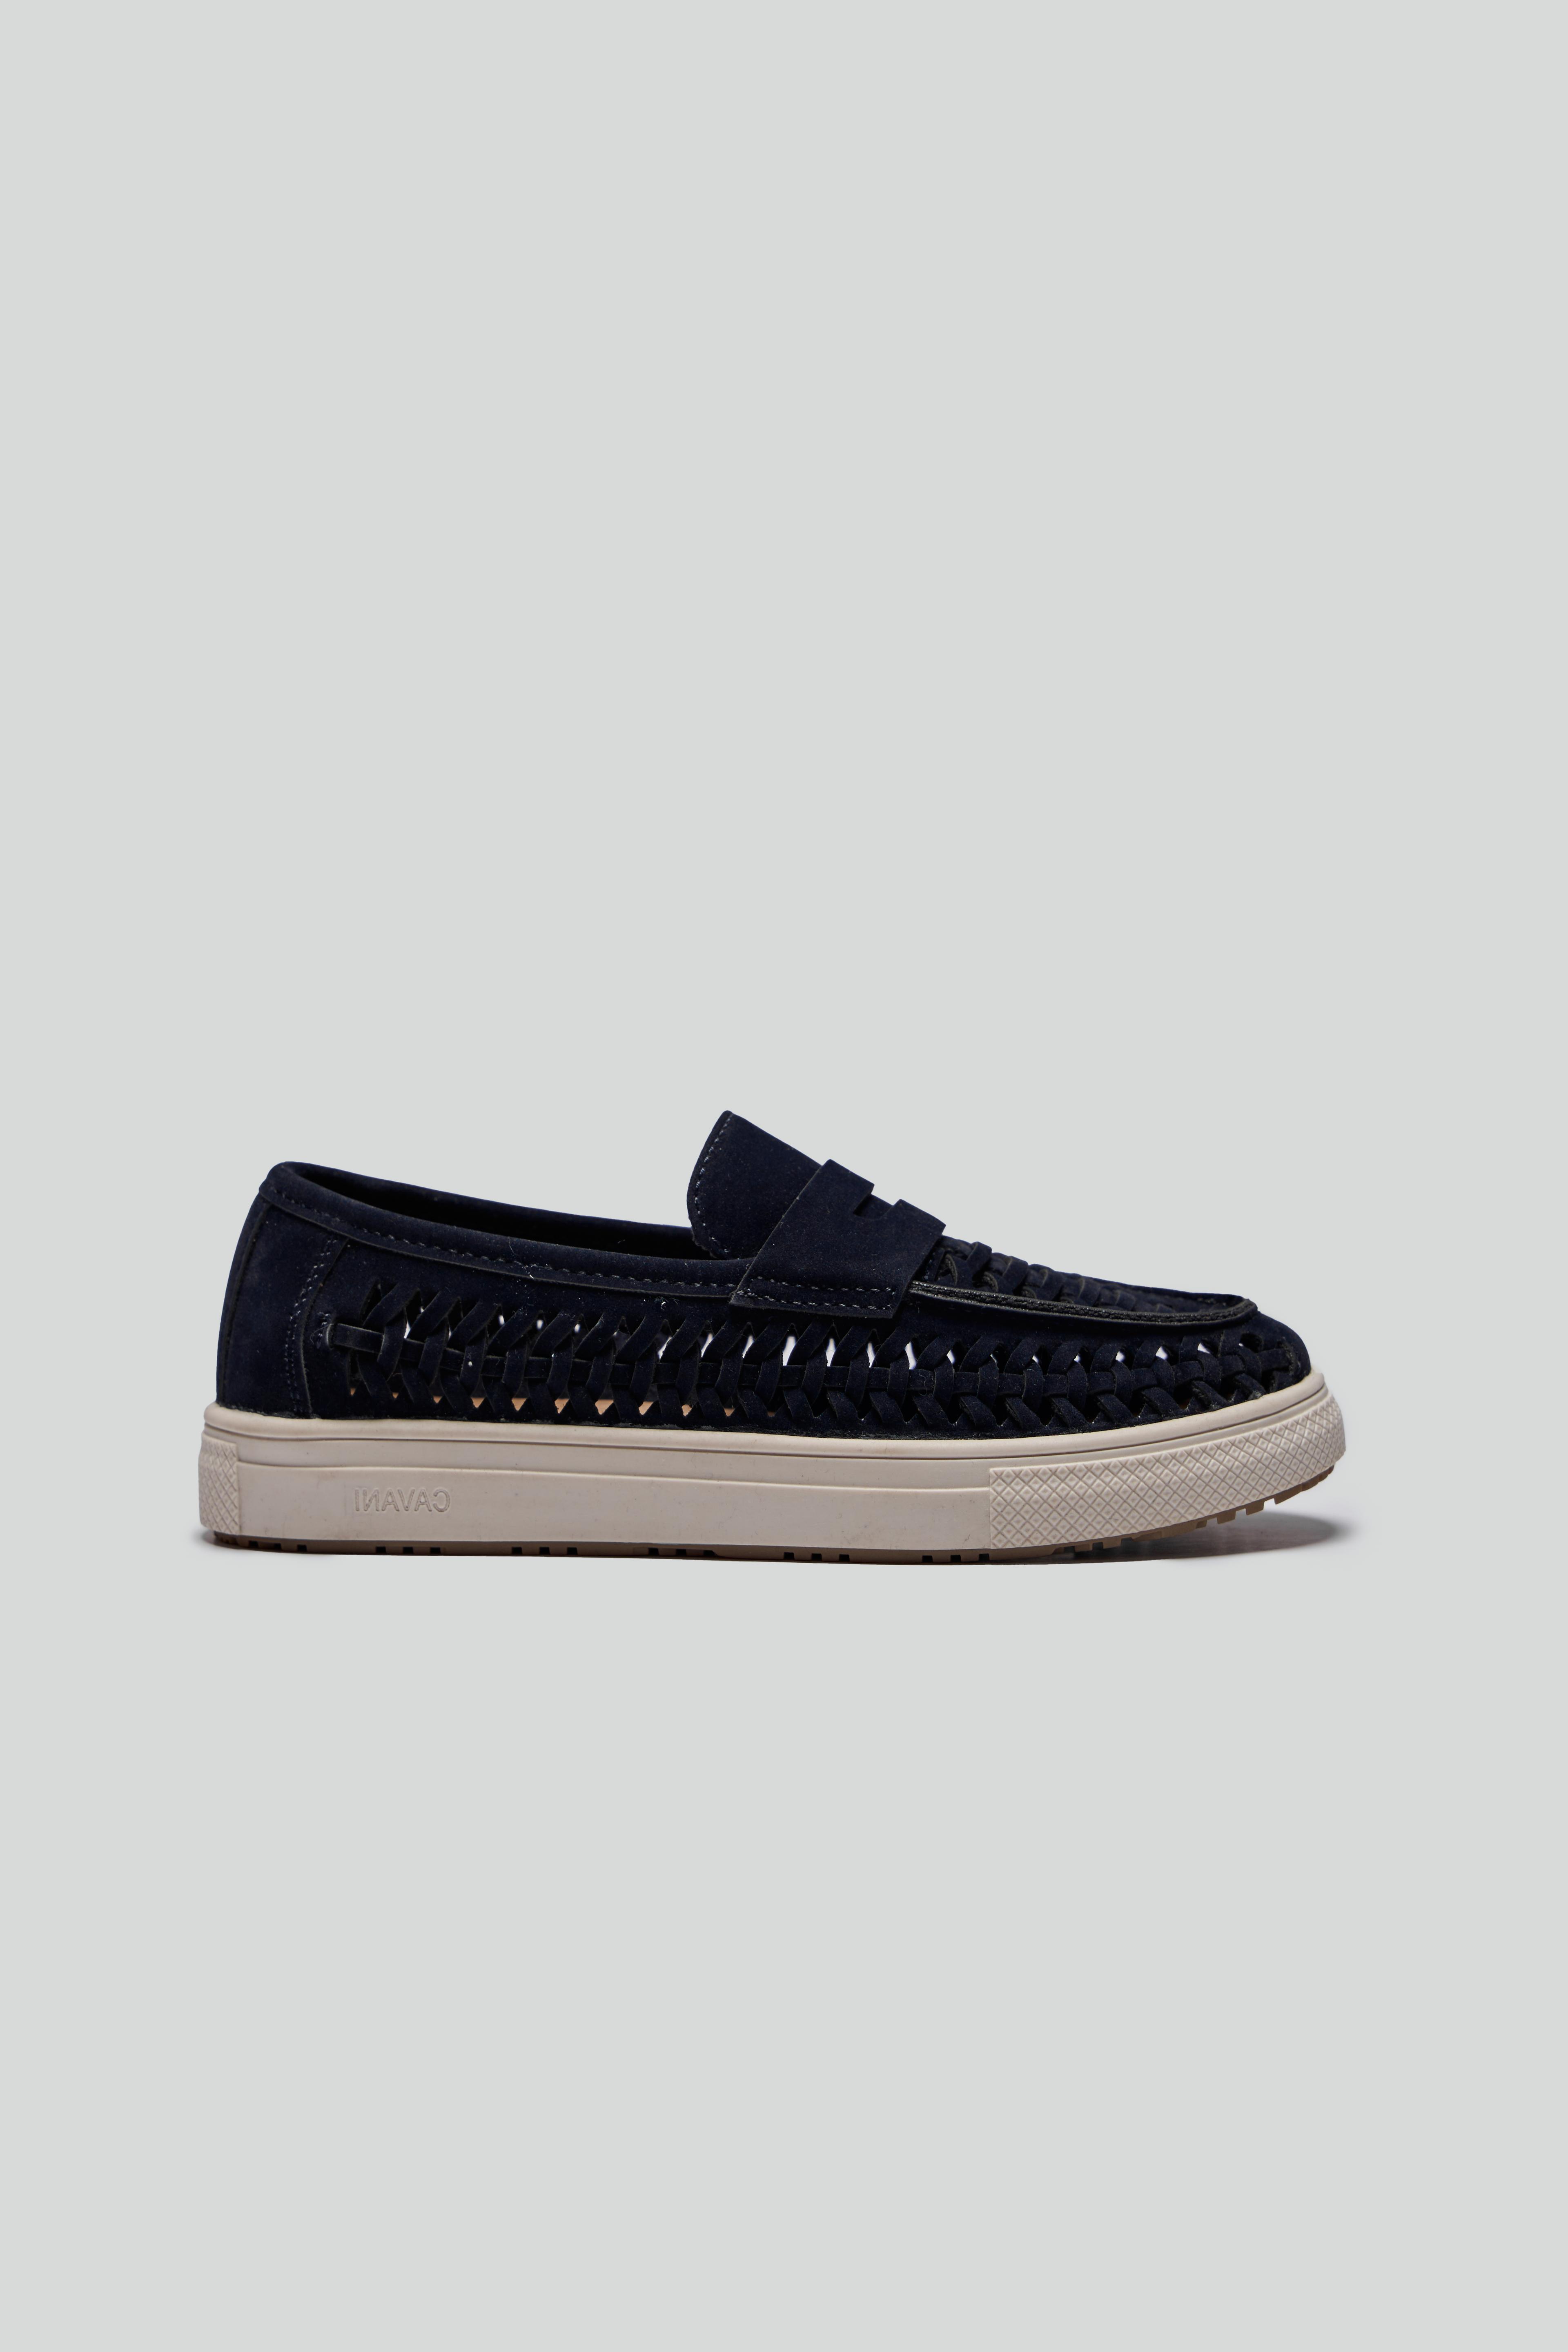 Boys Suede Penny Loafers with Woven Detail - TROY - Navy Blue